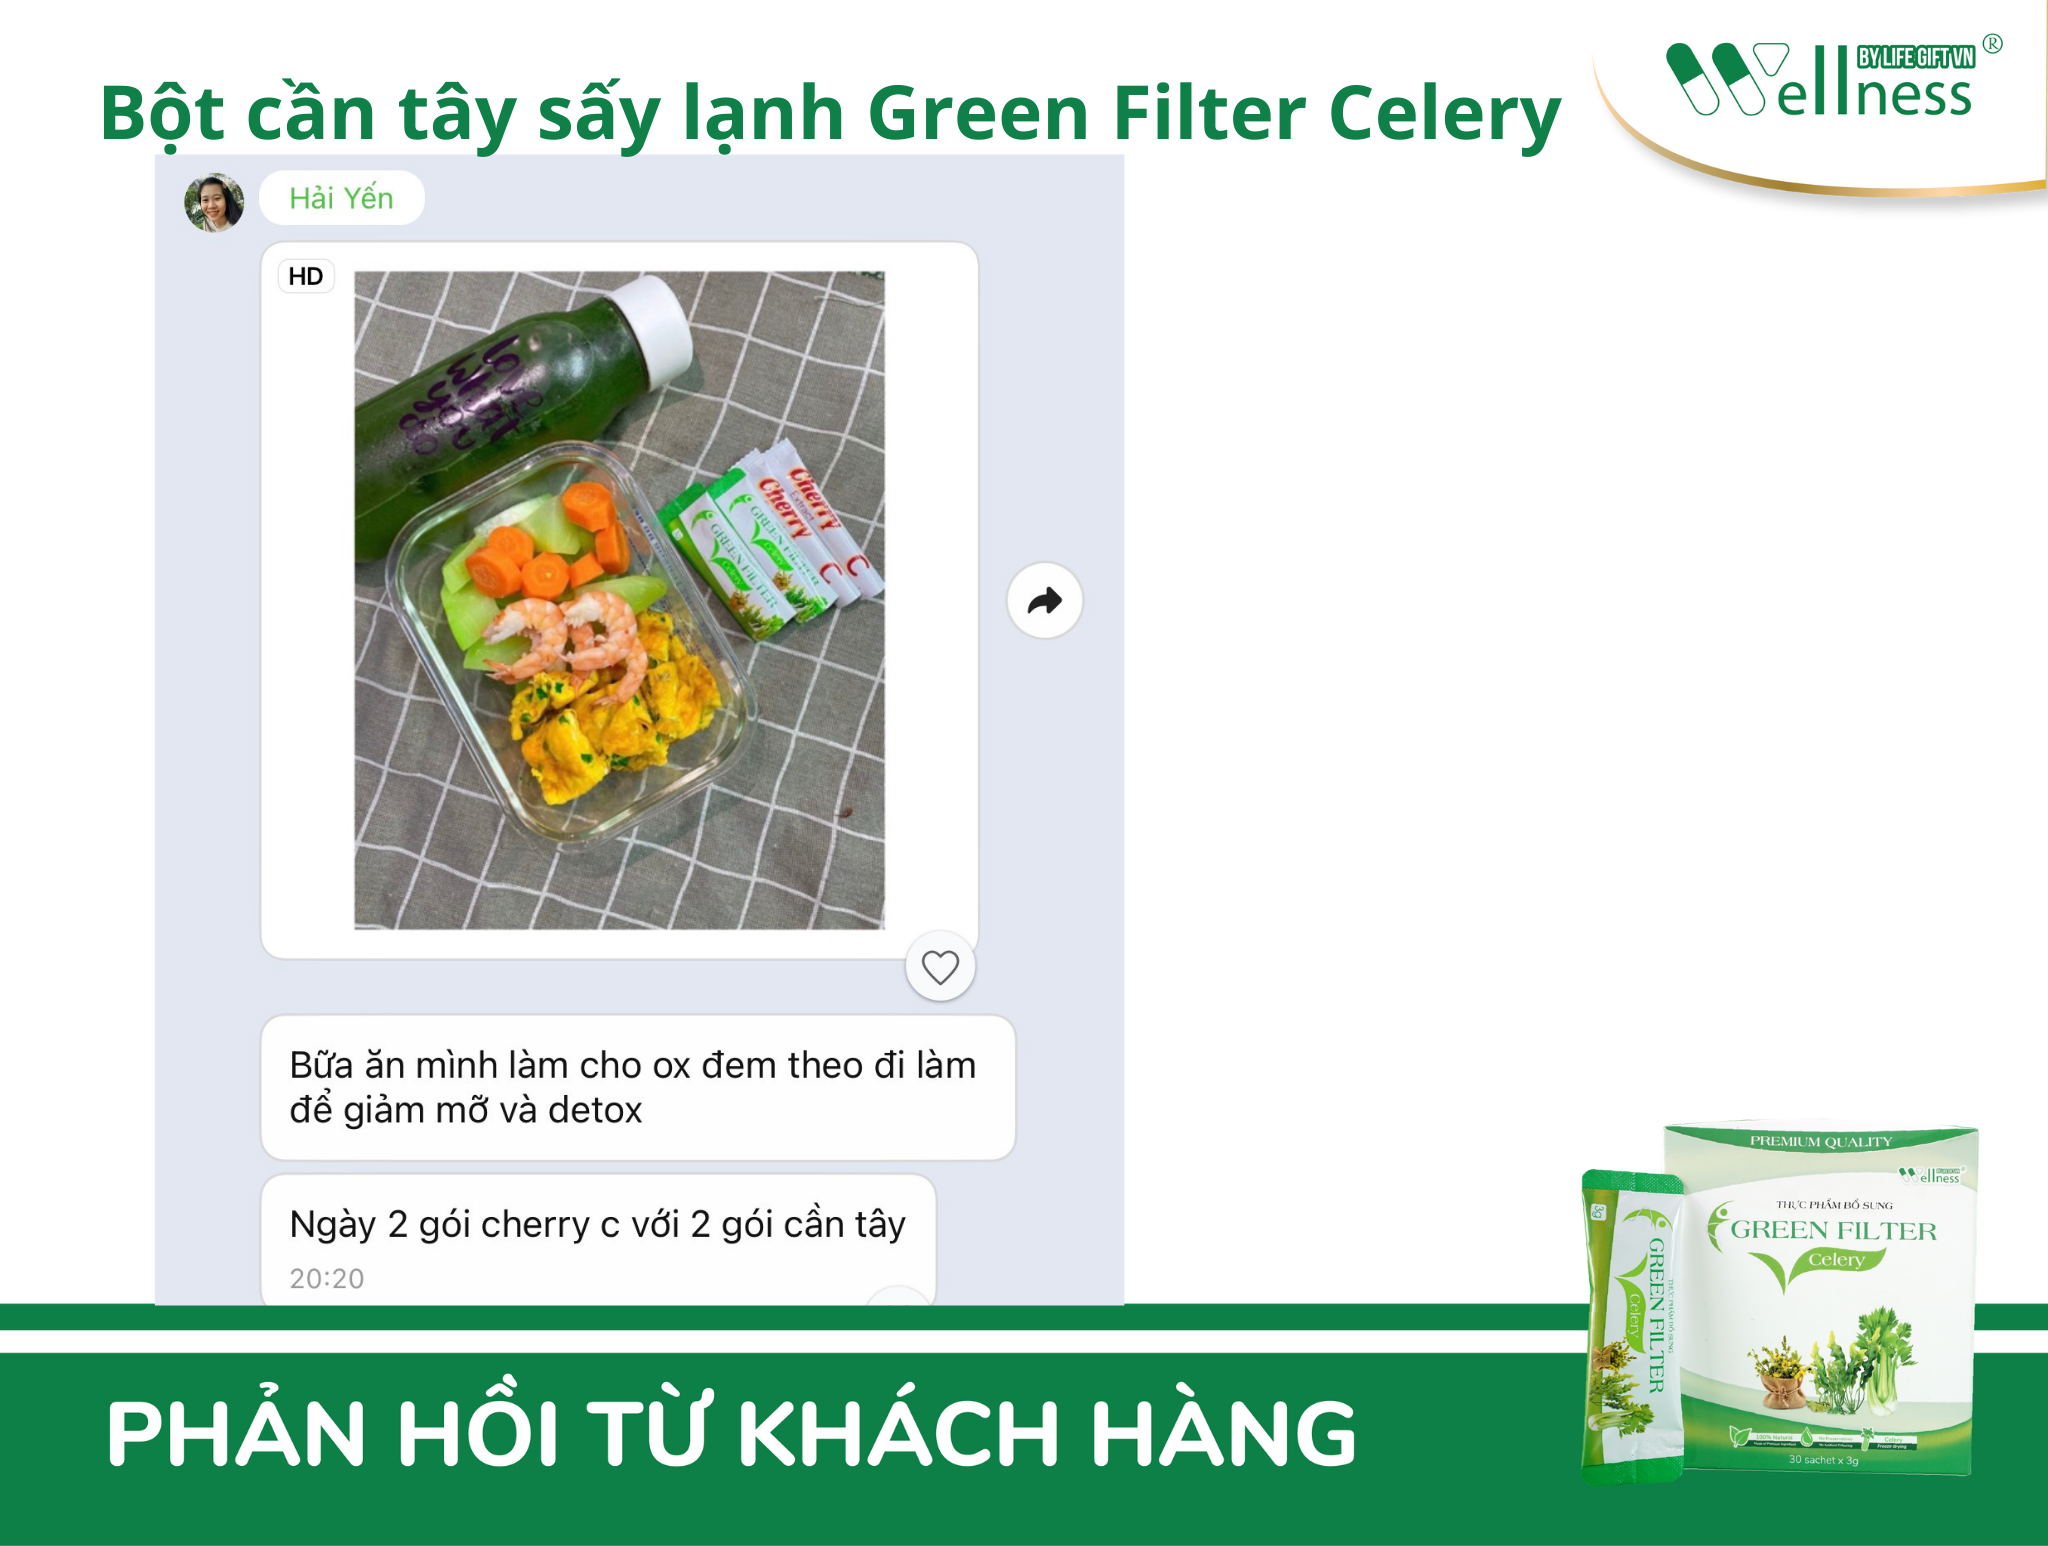 Thanh lọc cơ thể cùng Green Filter Celery - Wellness by Life Gift VN